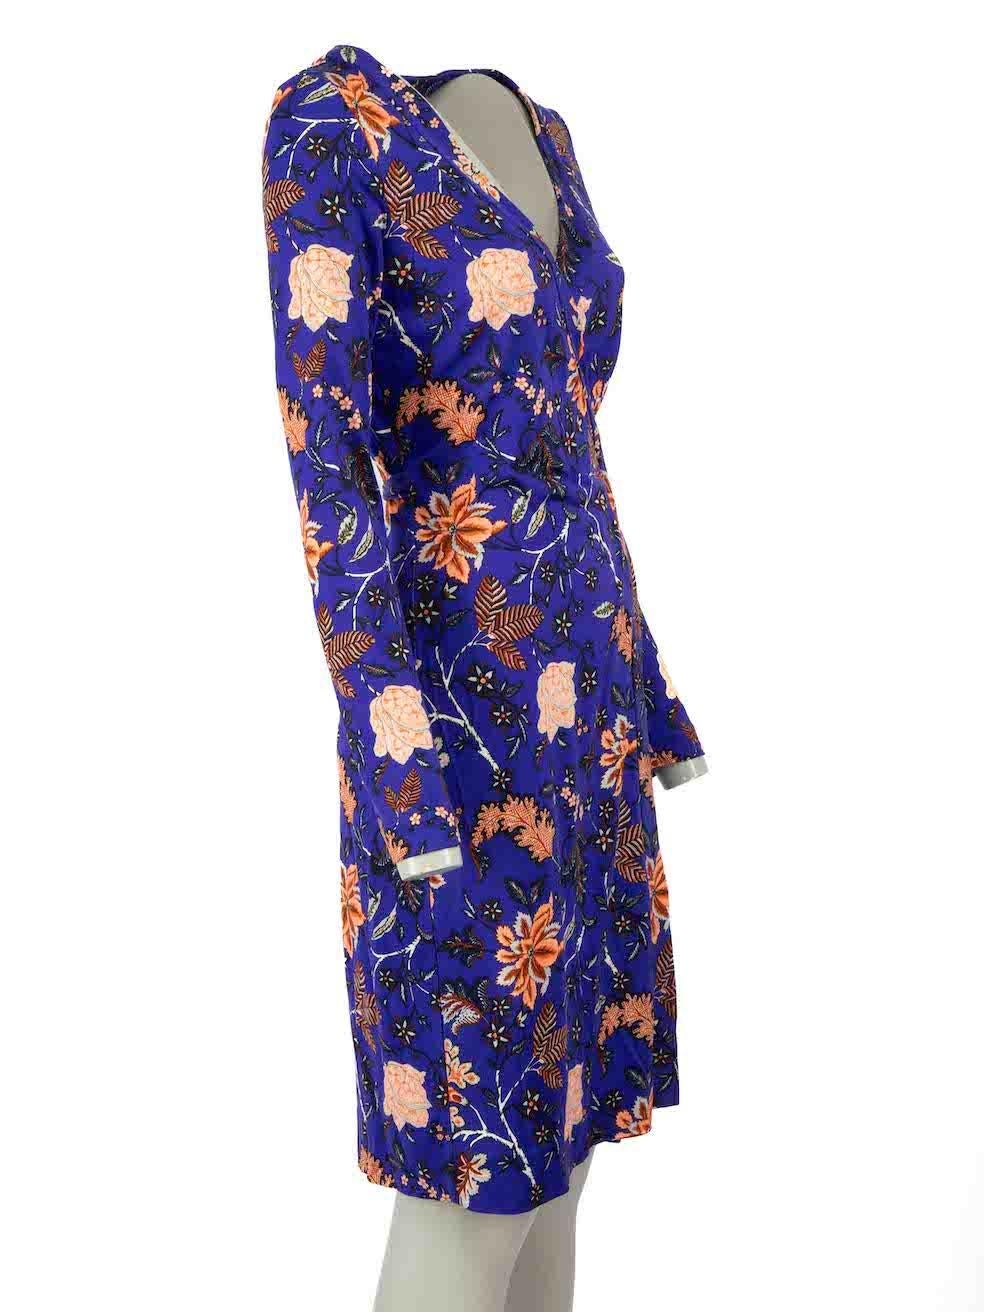 CONDITION is Very good. Minimal wear to dress is evident. Minimal wear to fabric composition with very small plucks to the weave at centre front neckline on this used Diane Von Furstenberg designer resale item.
 
Details
Purple
Silk
Wrap dress
Knee